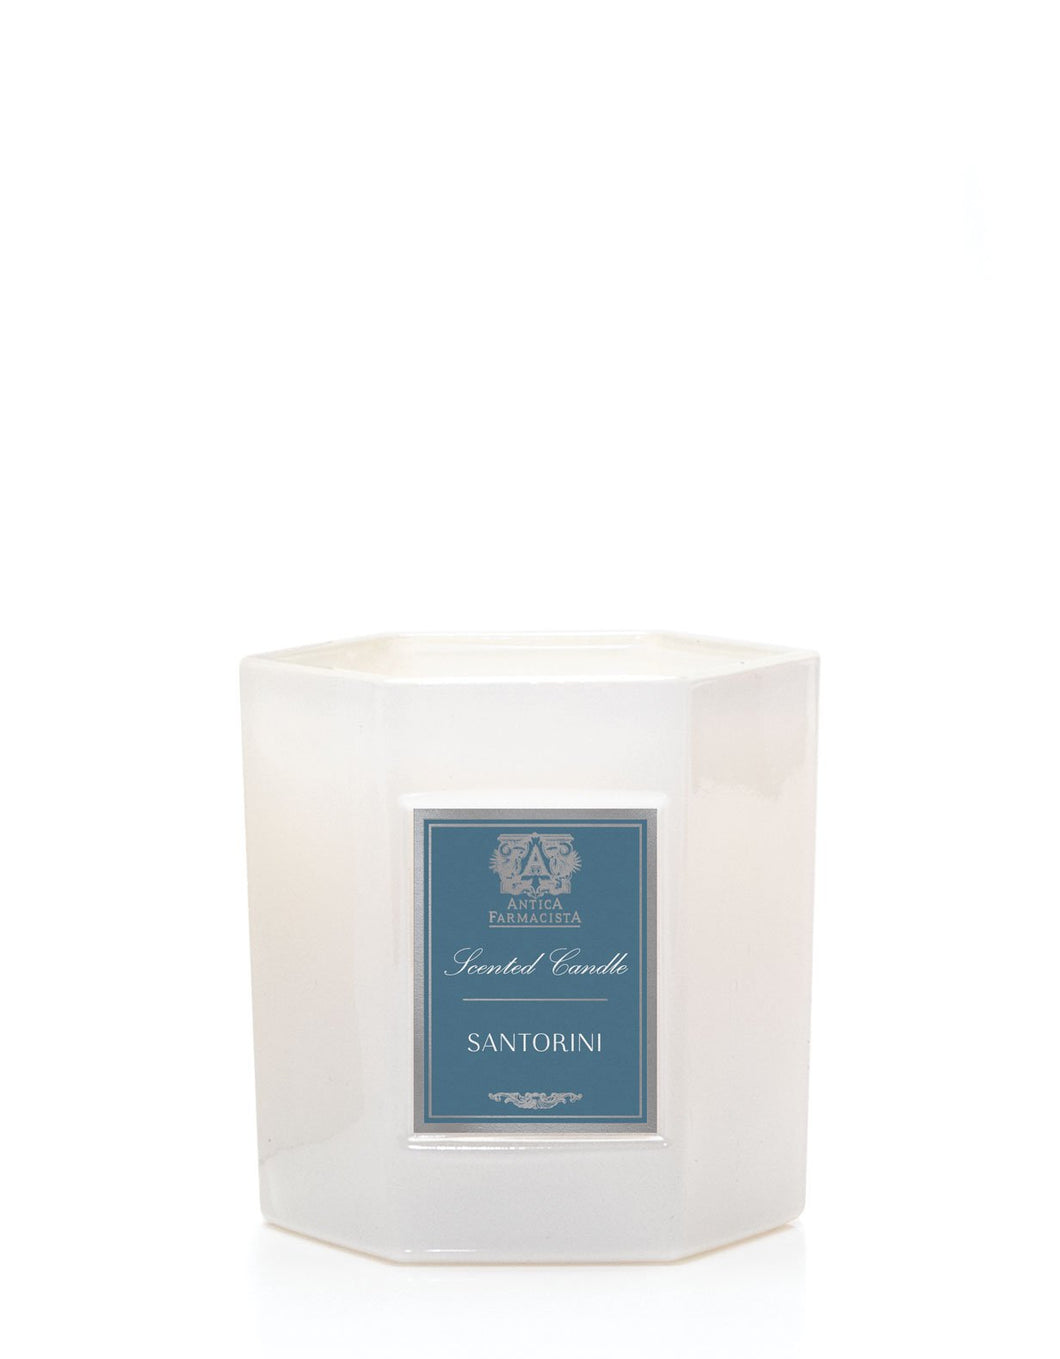 Hexagonal soft white glass candle with blue Antica Farmacista label